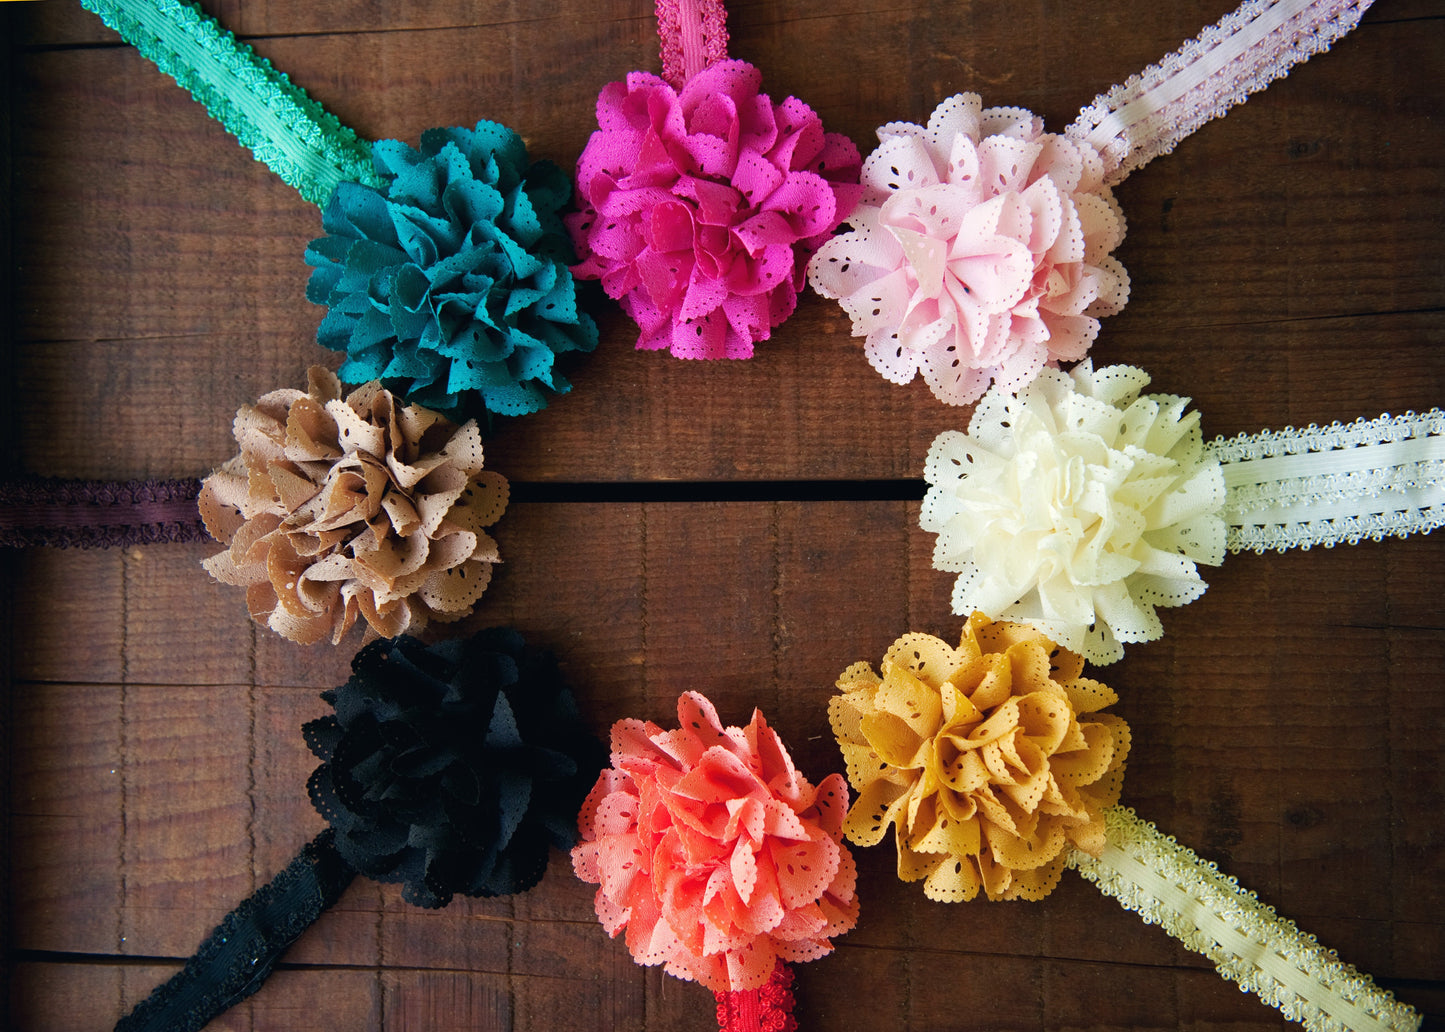 Fancy Eyelet Laced Flowers on Soft Lace Headbands, Headbands,Hair Flowers,Bows, Ema Jane Boutique